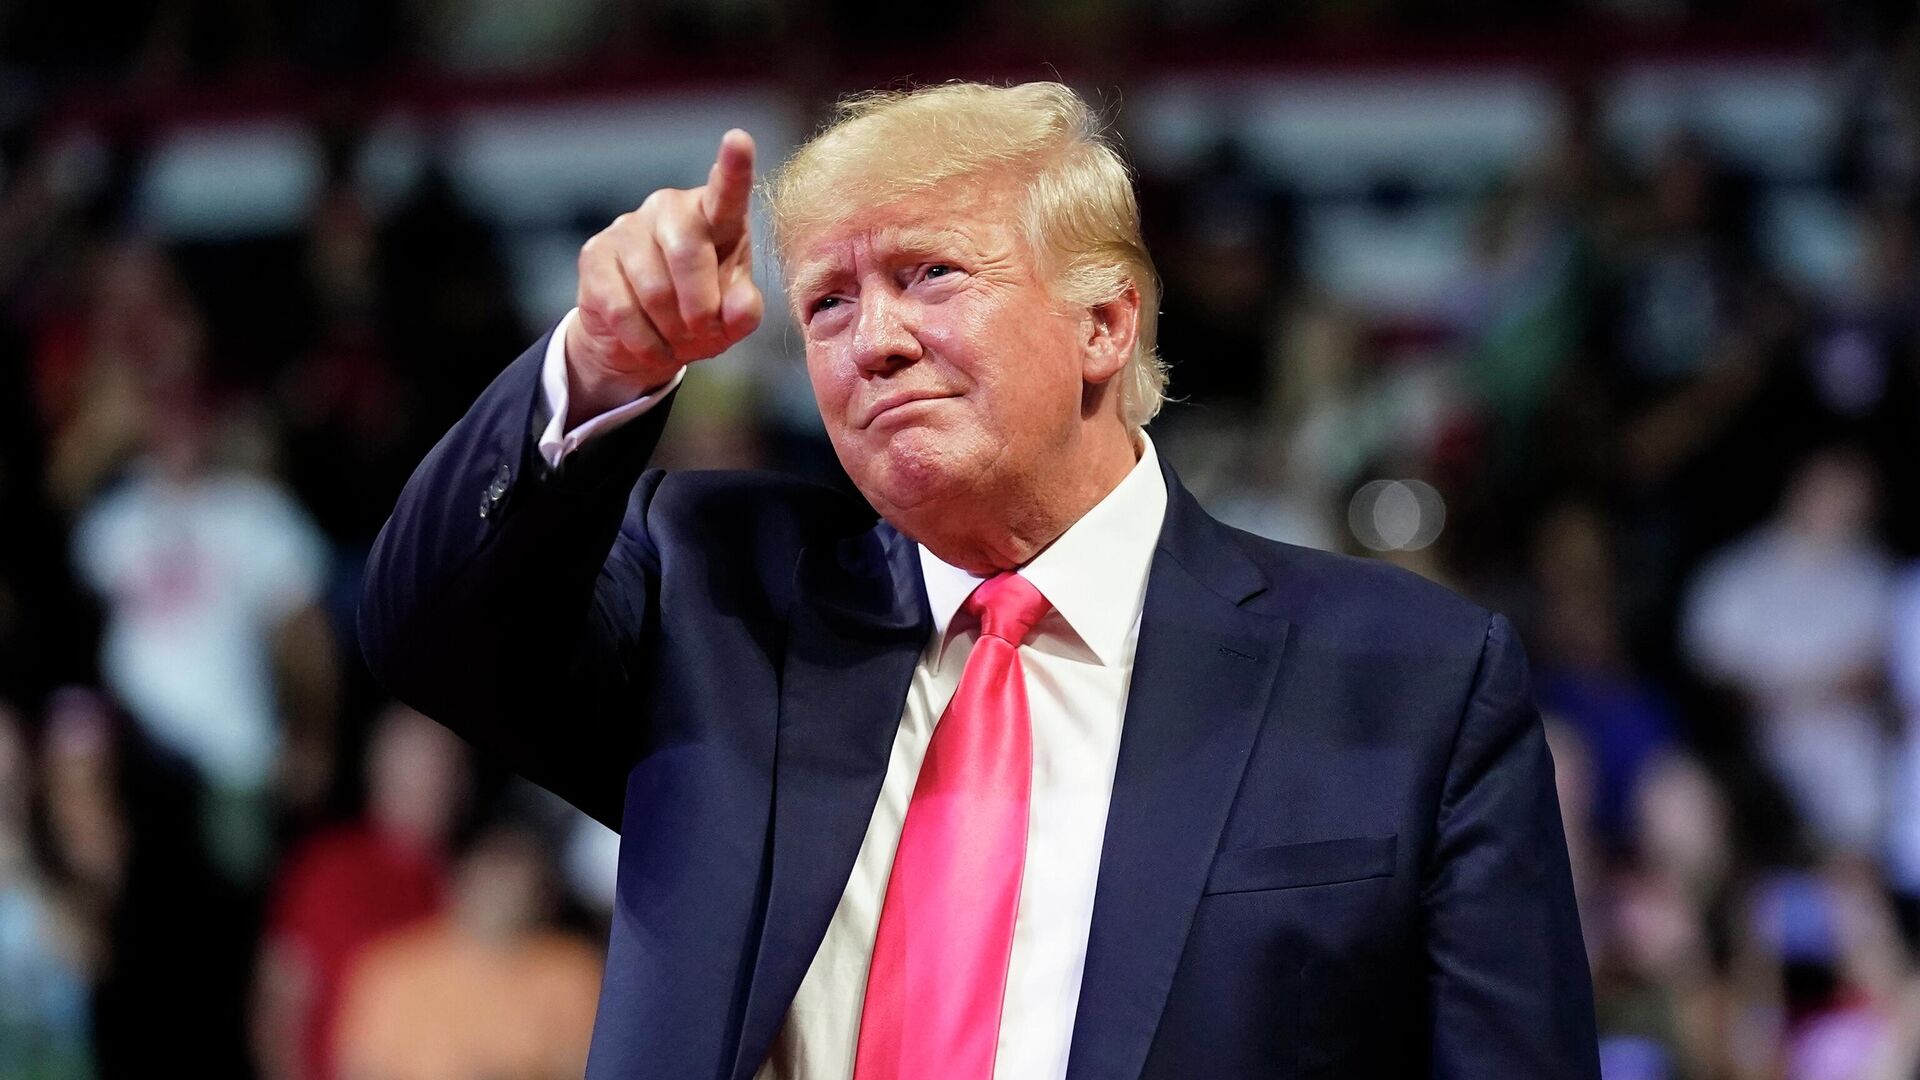 FILE - Former President Donald Trump points to the crowd as he arrives to speak at a rally July 22, 2022, in Prescott, Ariz. - Sputnik International, 1920, 31.03.2023